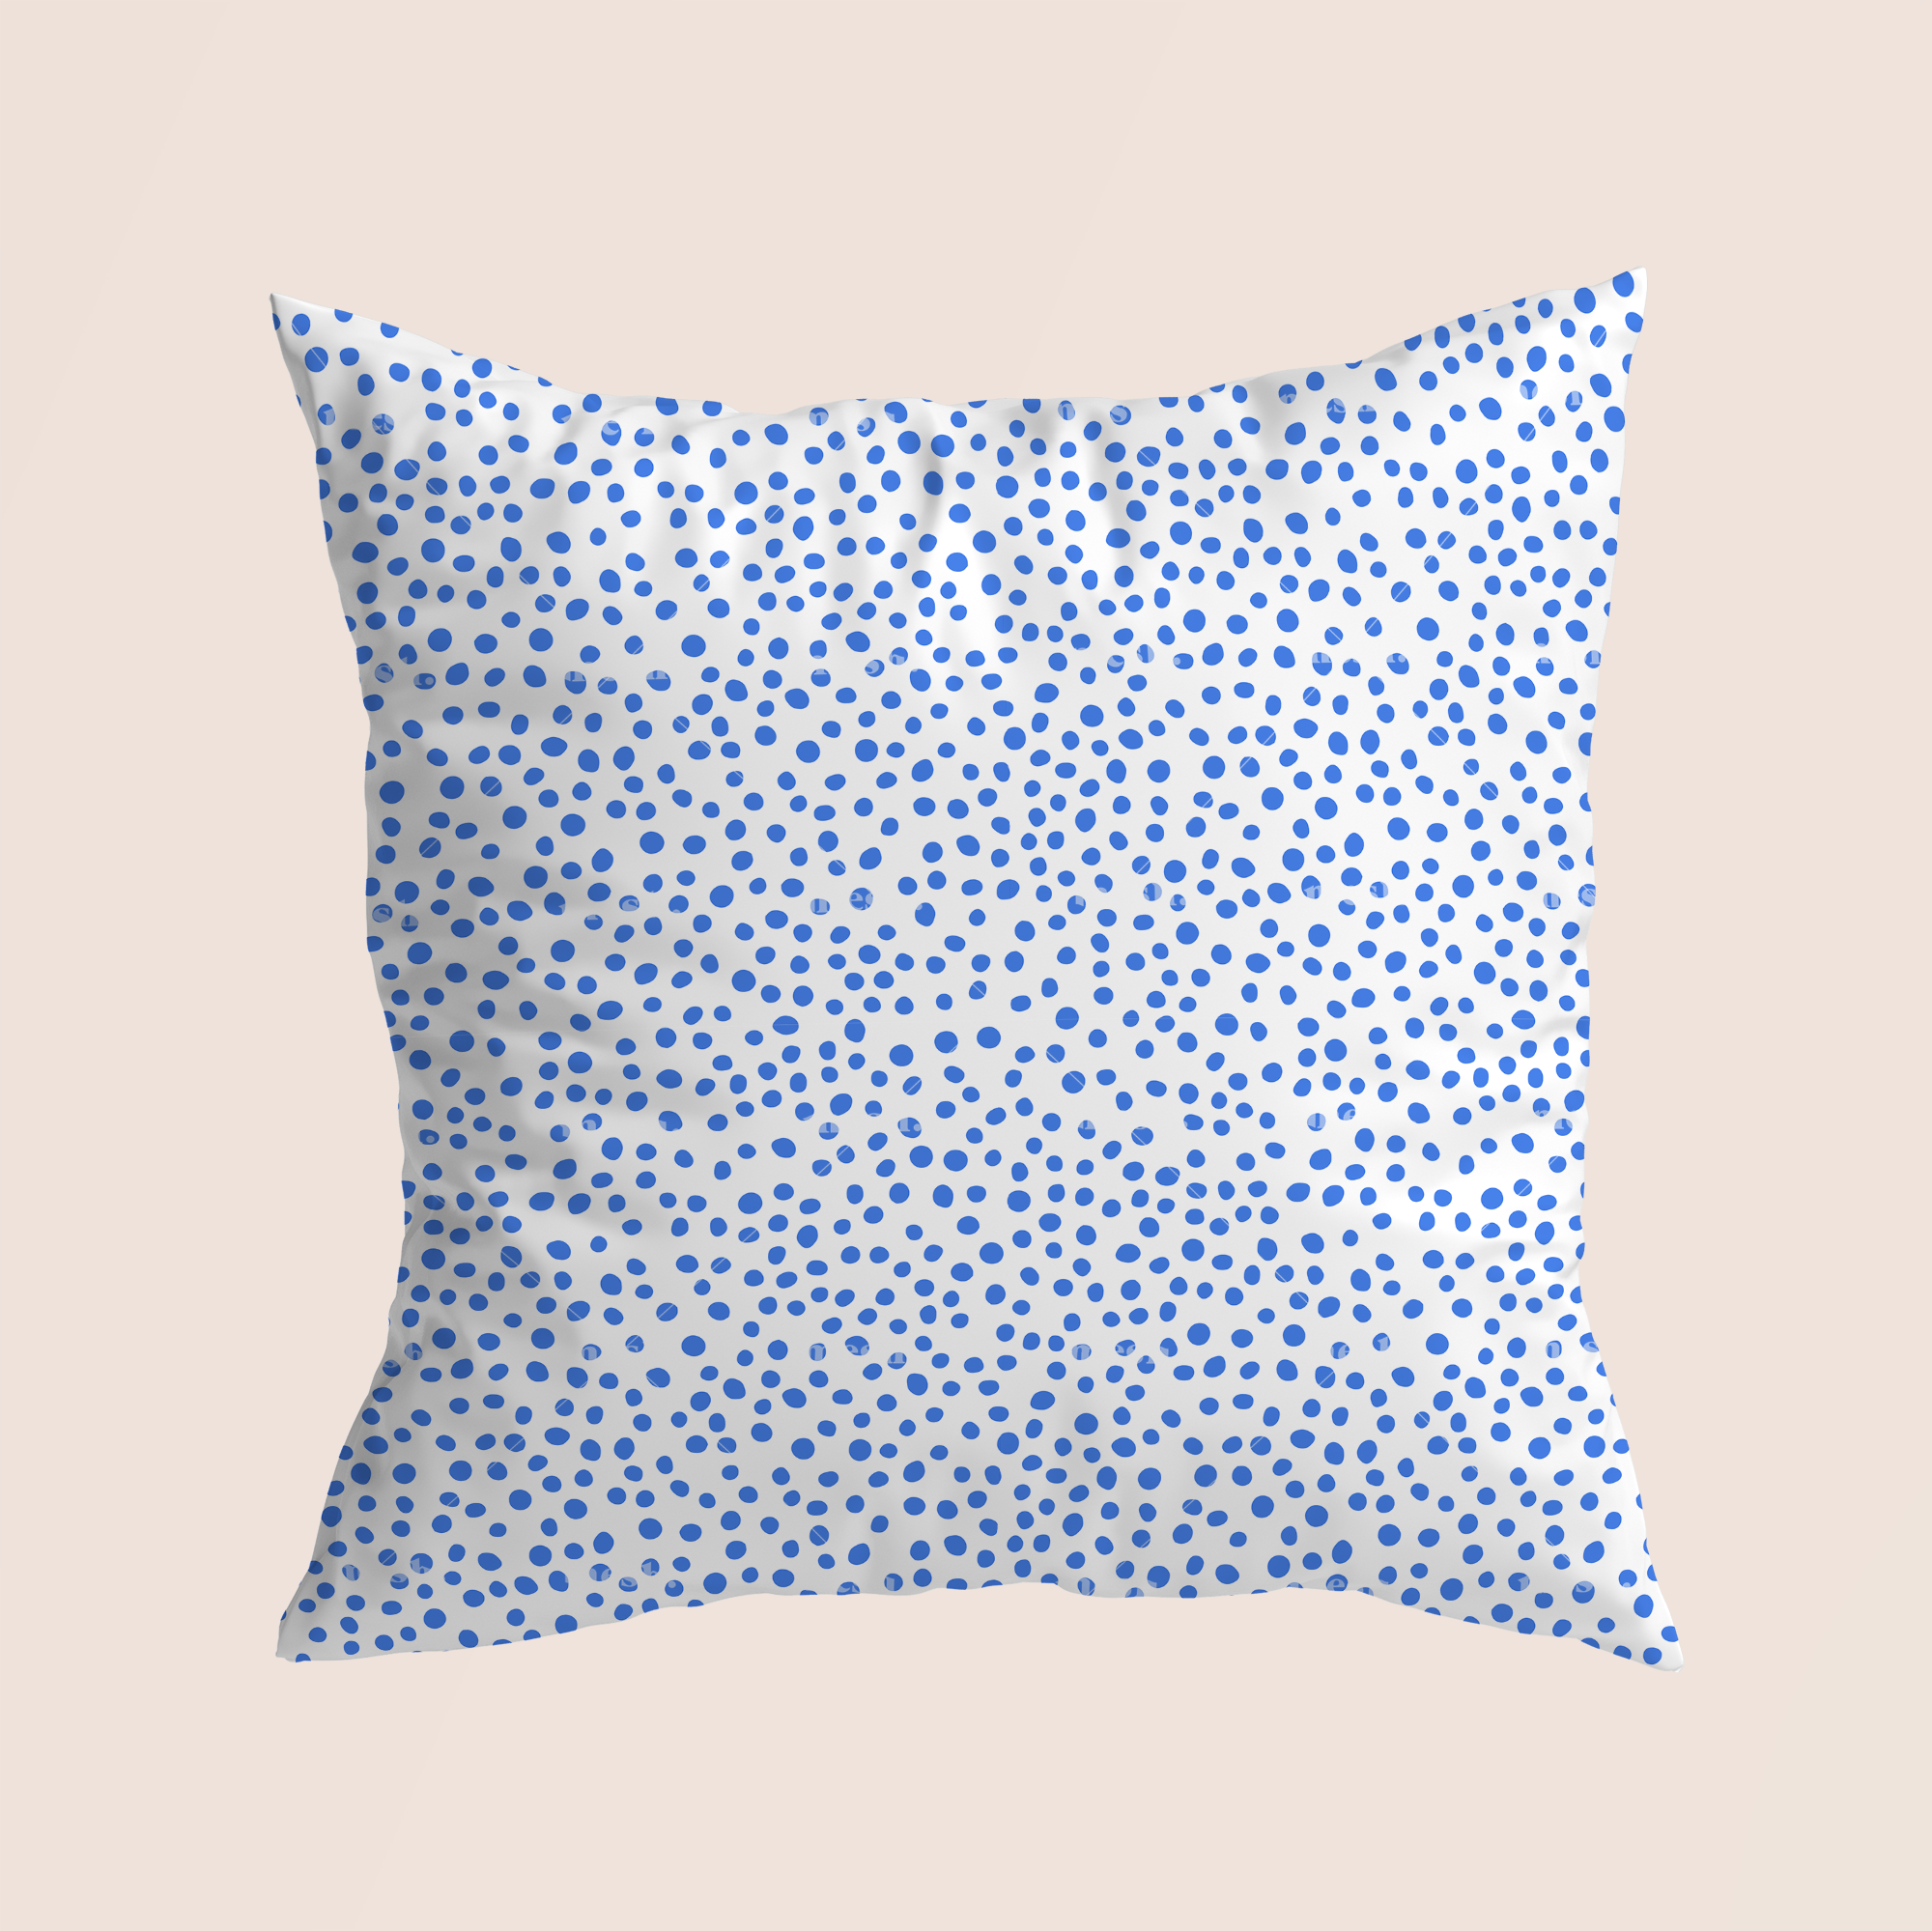 Microscopic bubbles blue in reverse pattern design printed on recycled fabric canvas mockup